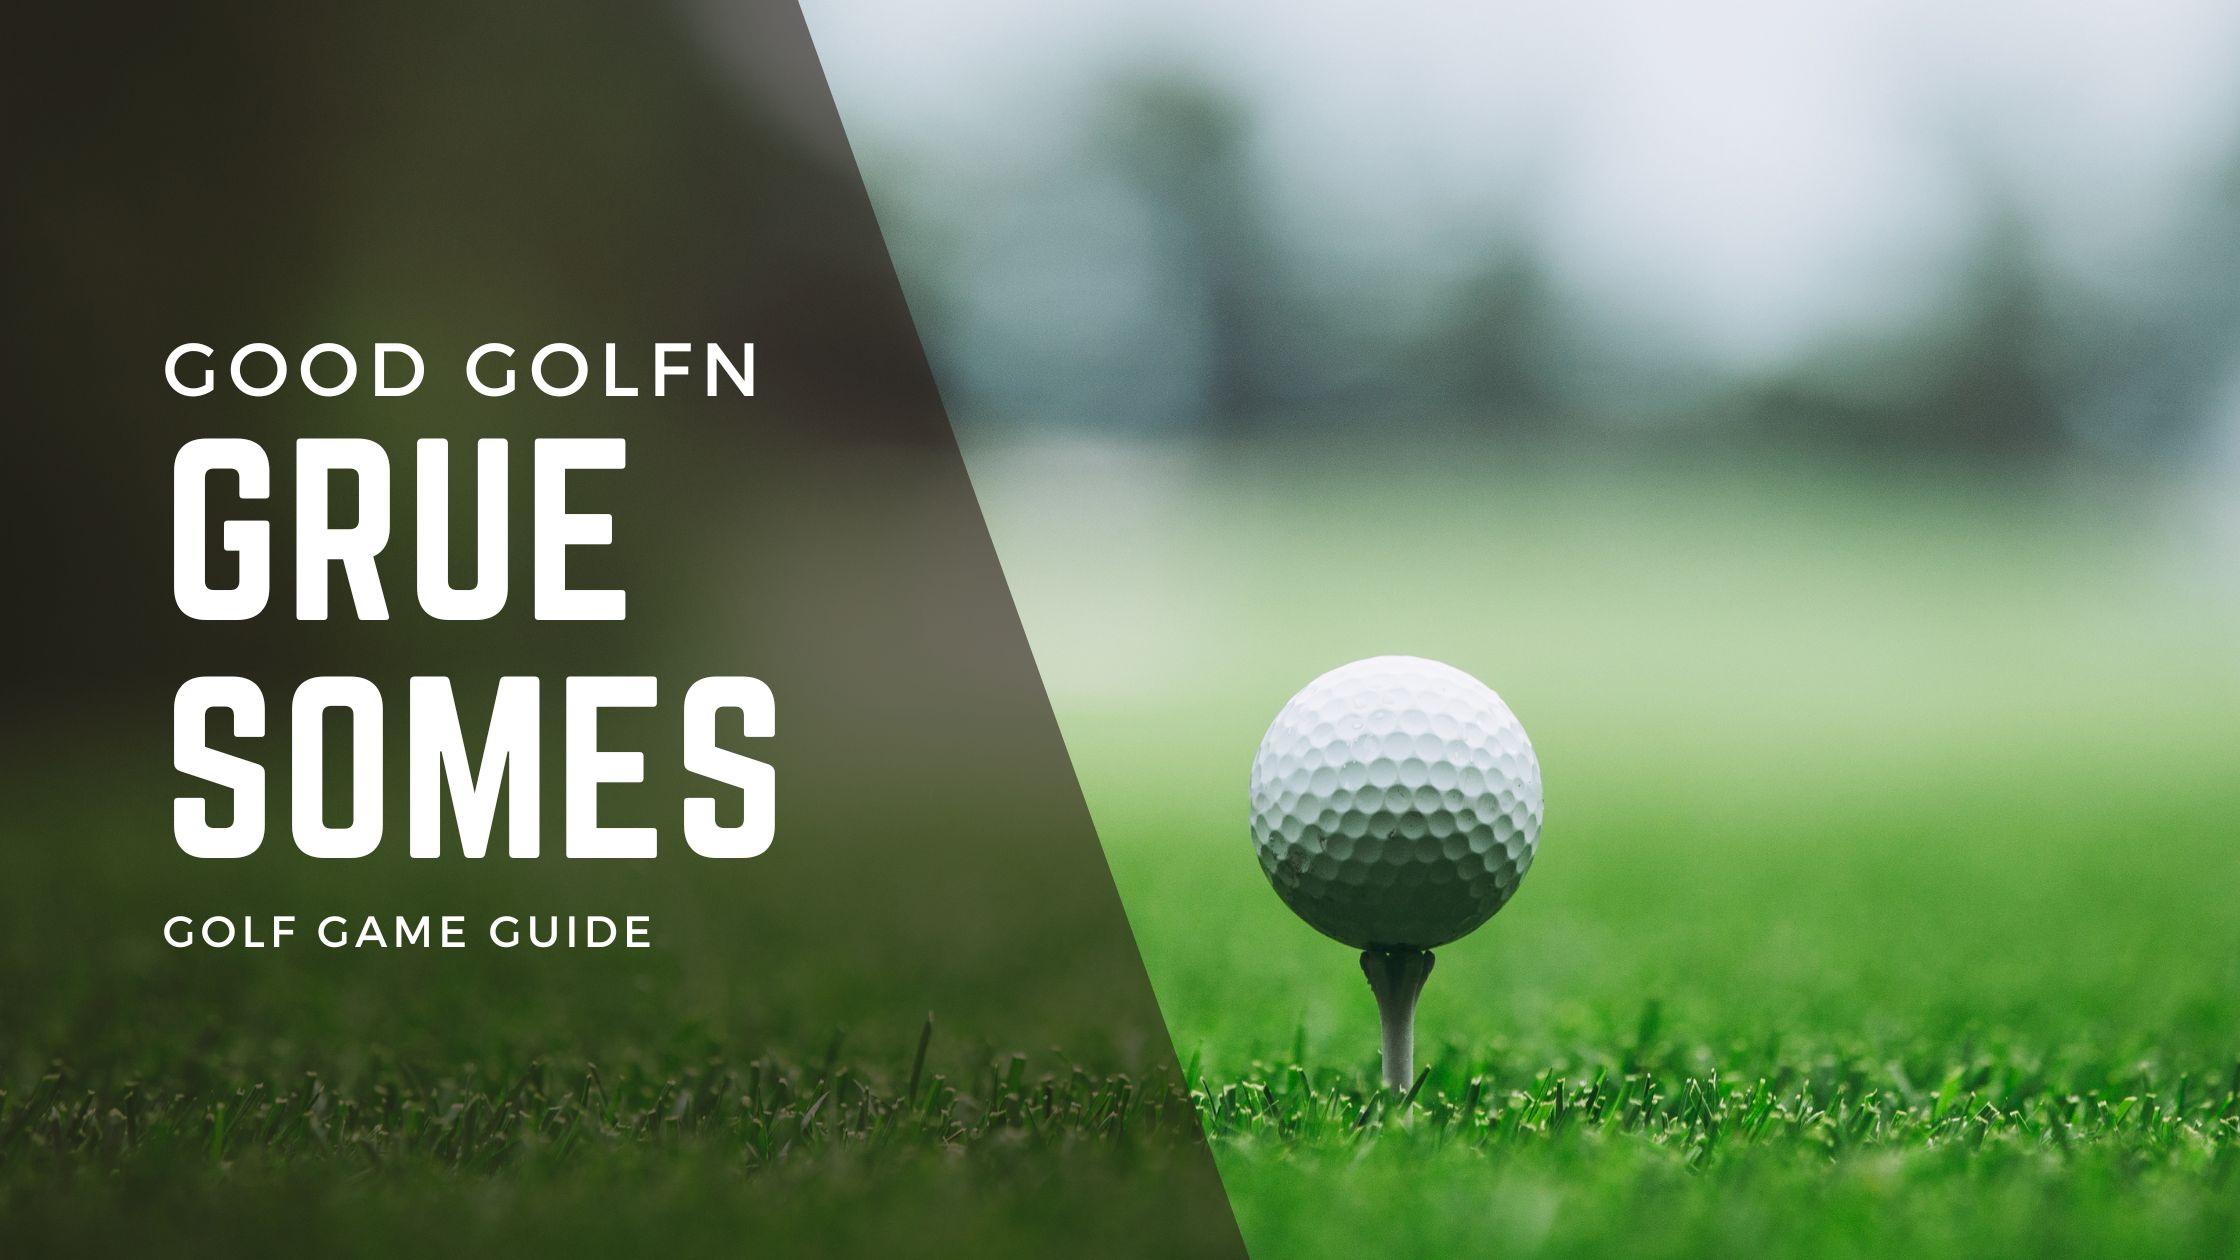 Unlock the secrets of golf with insights into formats like gruesomes golf, strategies for mental strength, and tips for tournament play.